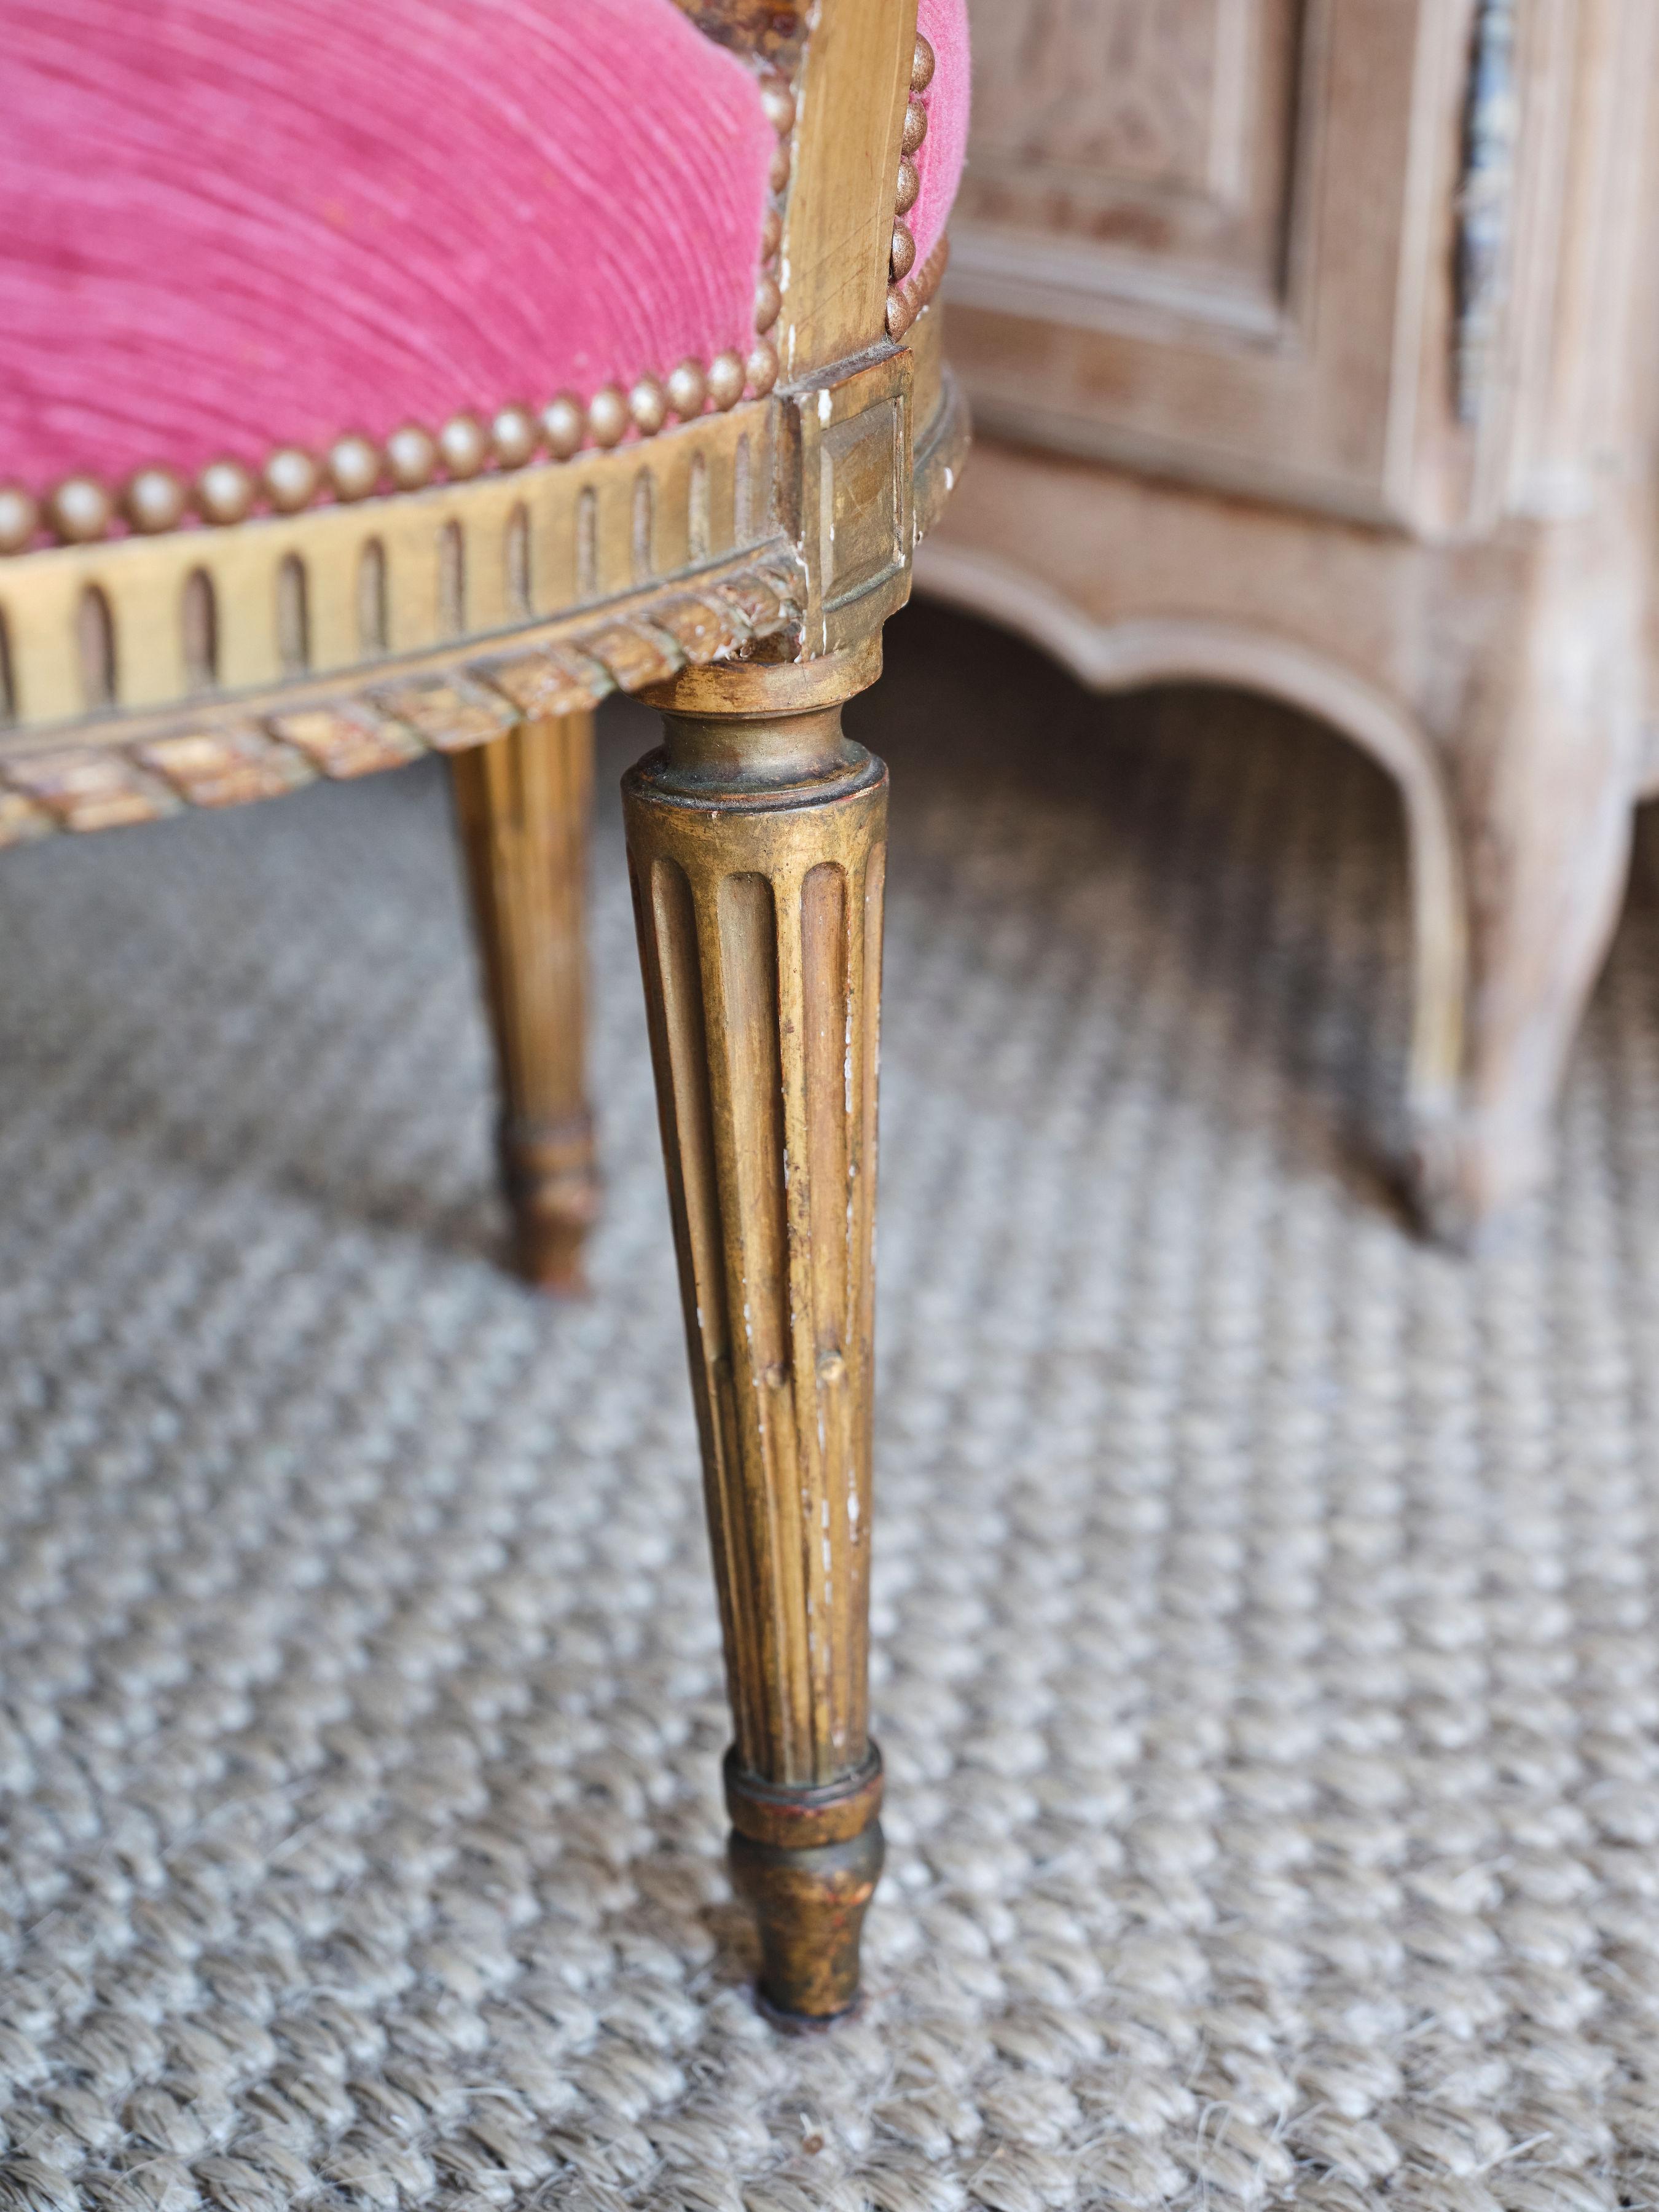 These stunning 18th century pink armchairs really stand out and make a statement! Originating from the Louis XVI period, the chairs have ornate wood carved details all over. The legs of the chair have lined wood details with floral carved detail